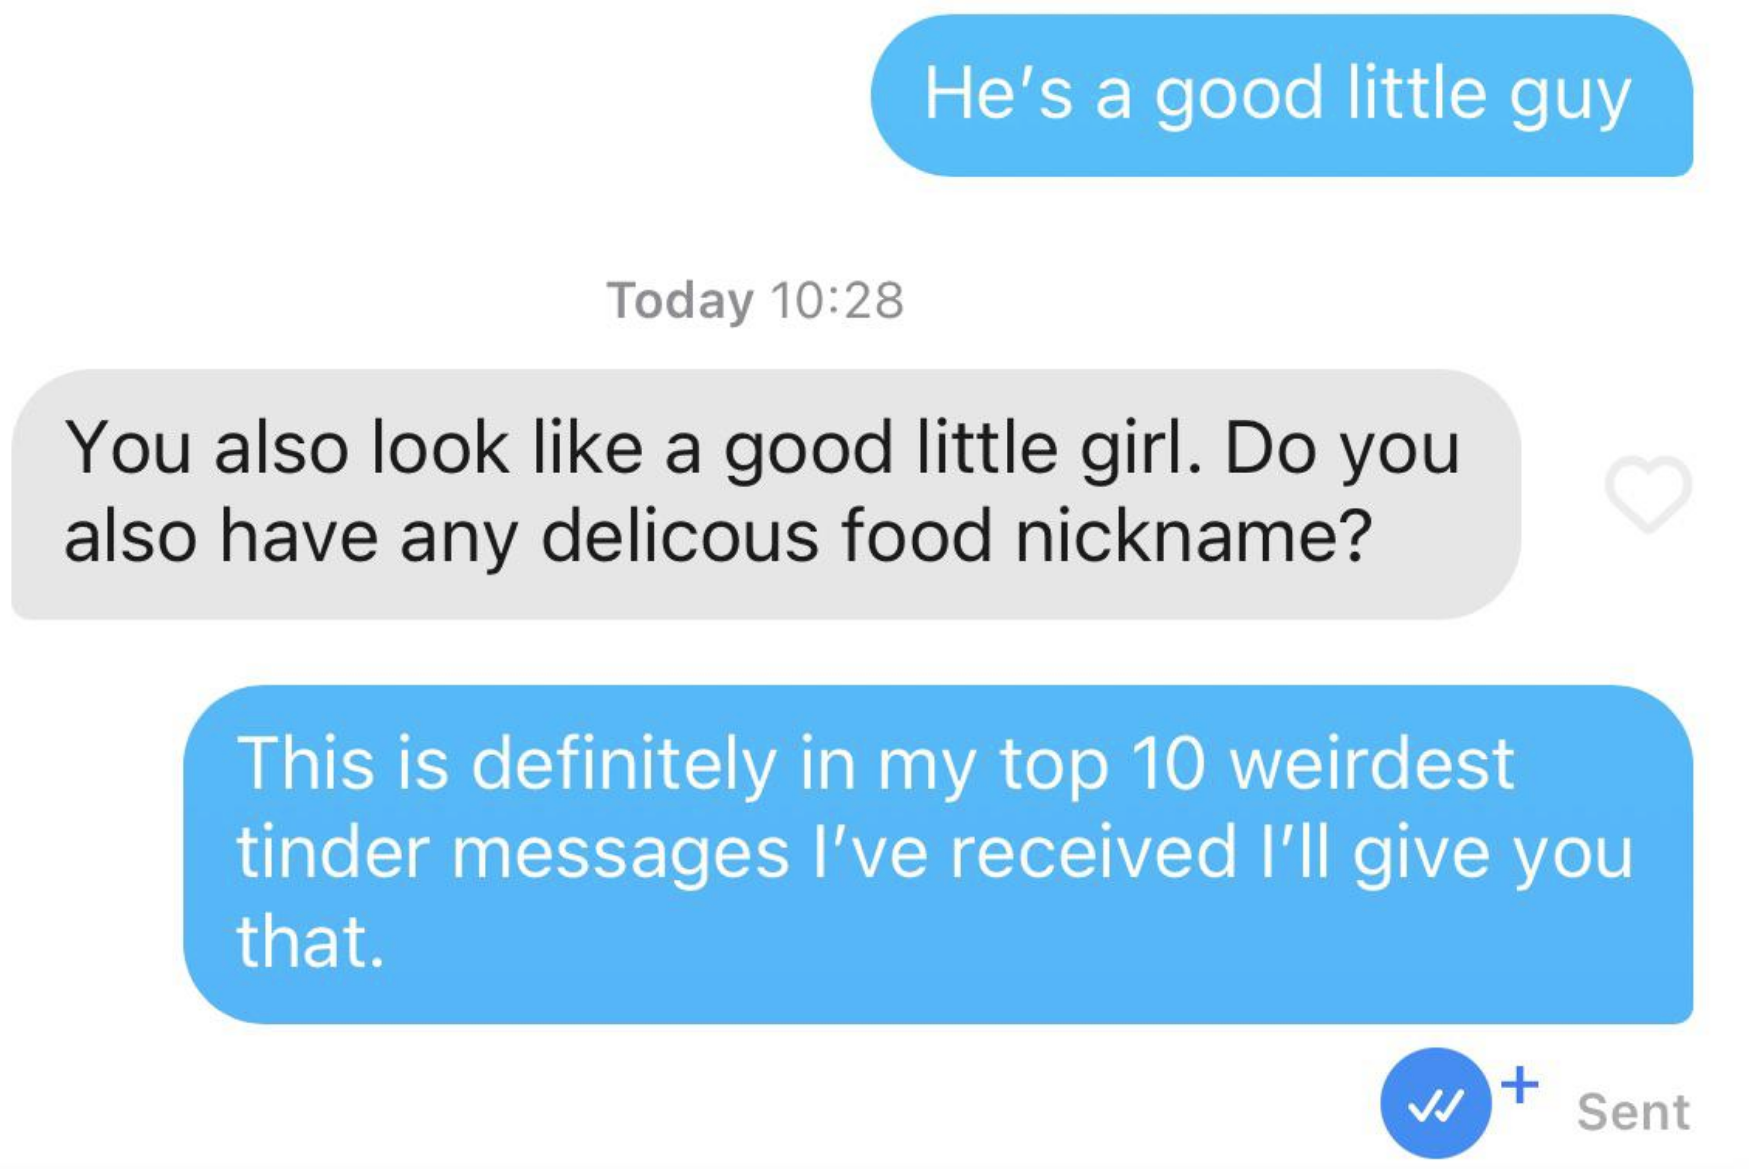 &quot;He&#x27;s a good little guy&quot;; &quot;You also look like a good little girl; do you also have any delicious food nickname?&quot; &quot;This is definitely in my top 10 weirdest Tinder messages I&#x27;ve received, I&#x27;ll give you that&quot;